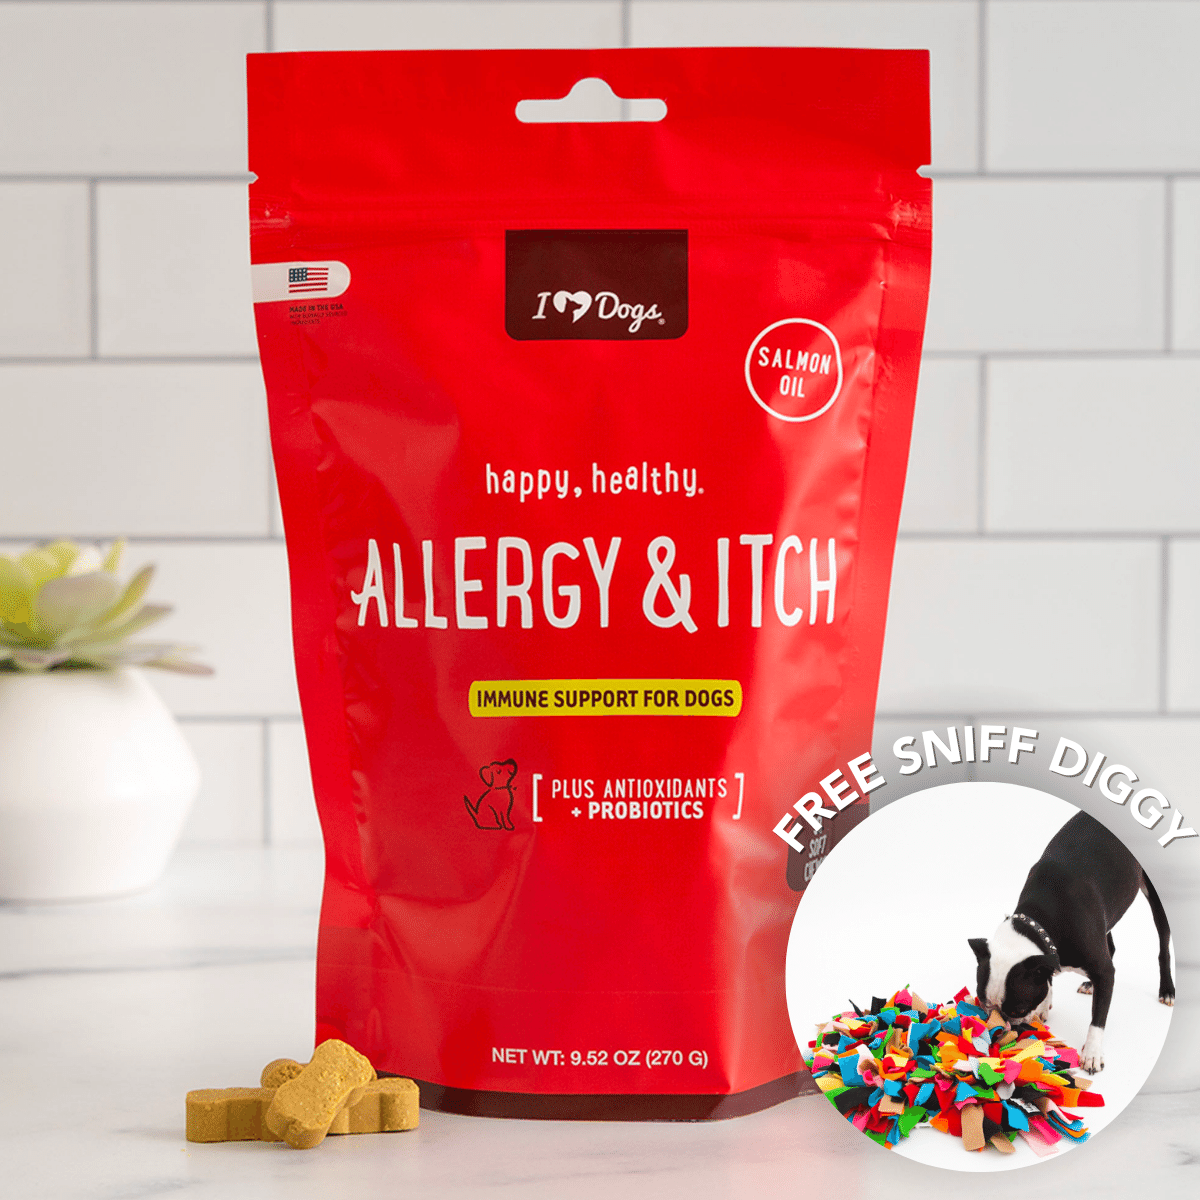 Free Sniff Diggy Dog Toy with Purchase of Allergy & Itch Supplement